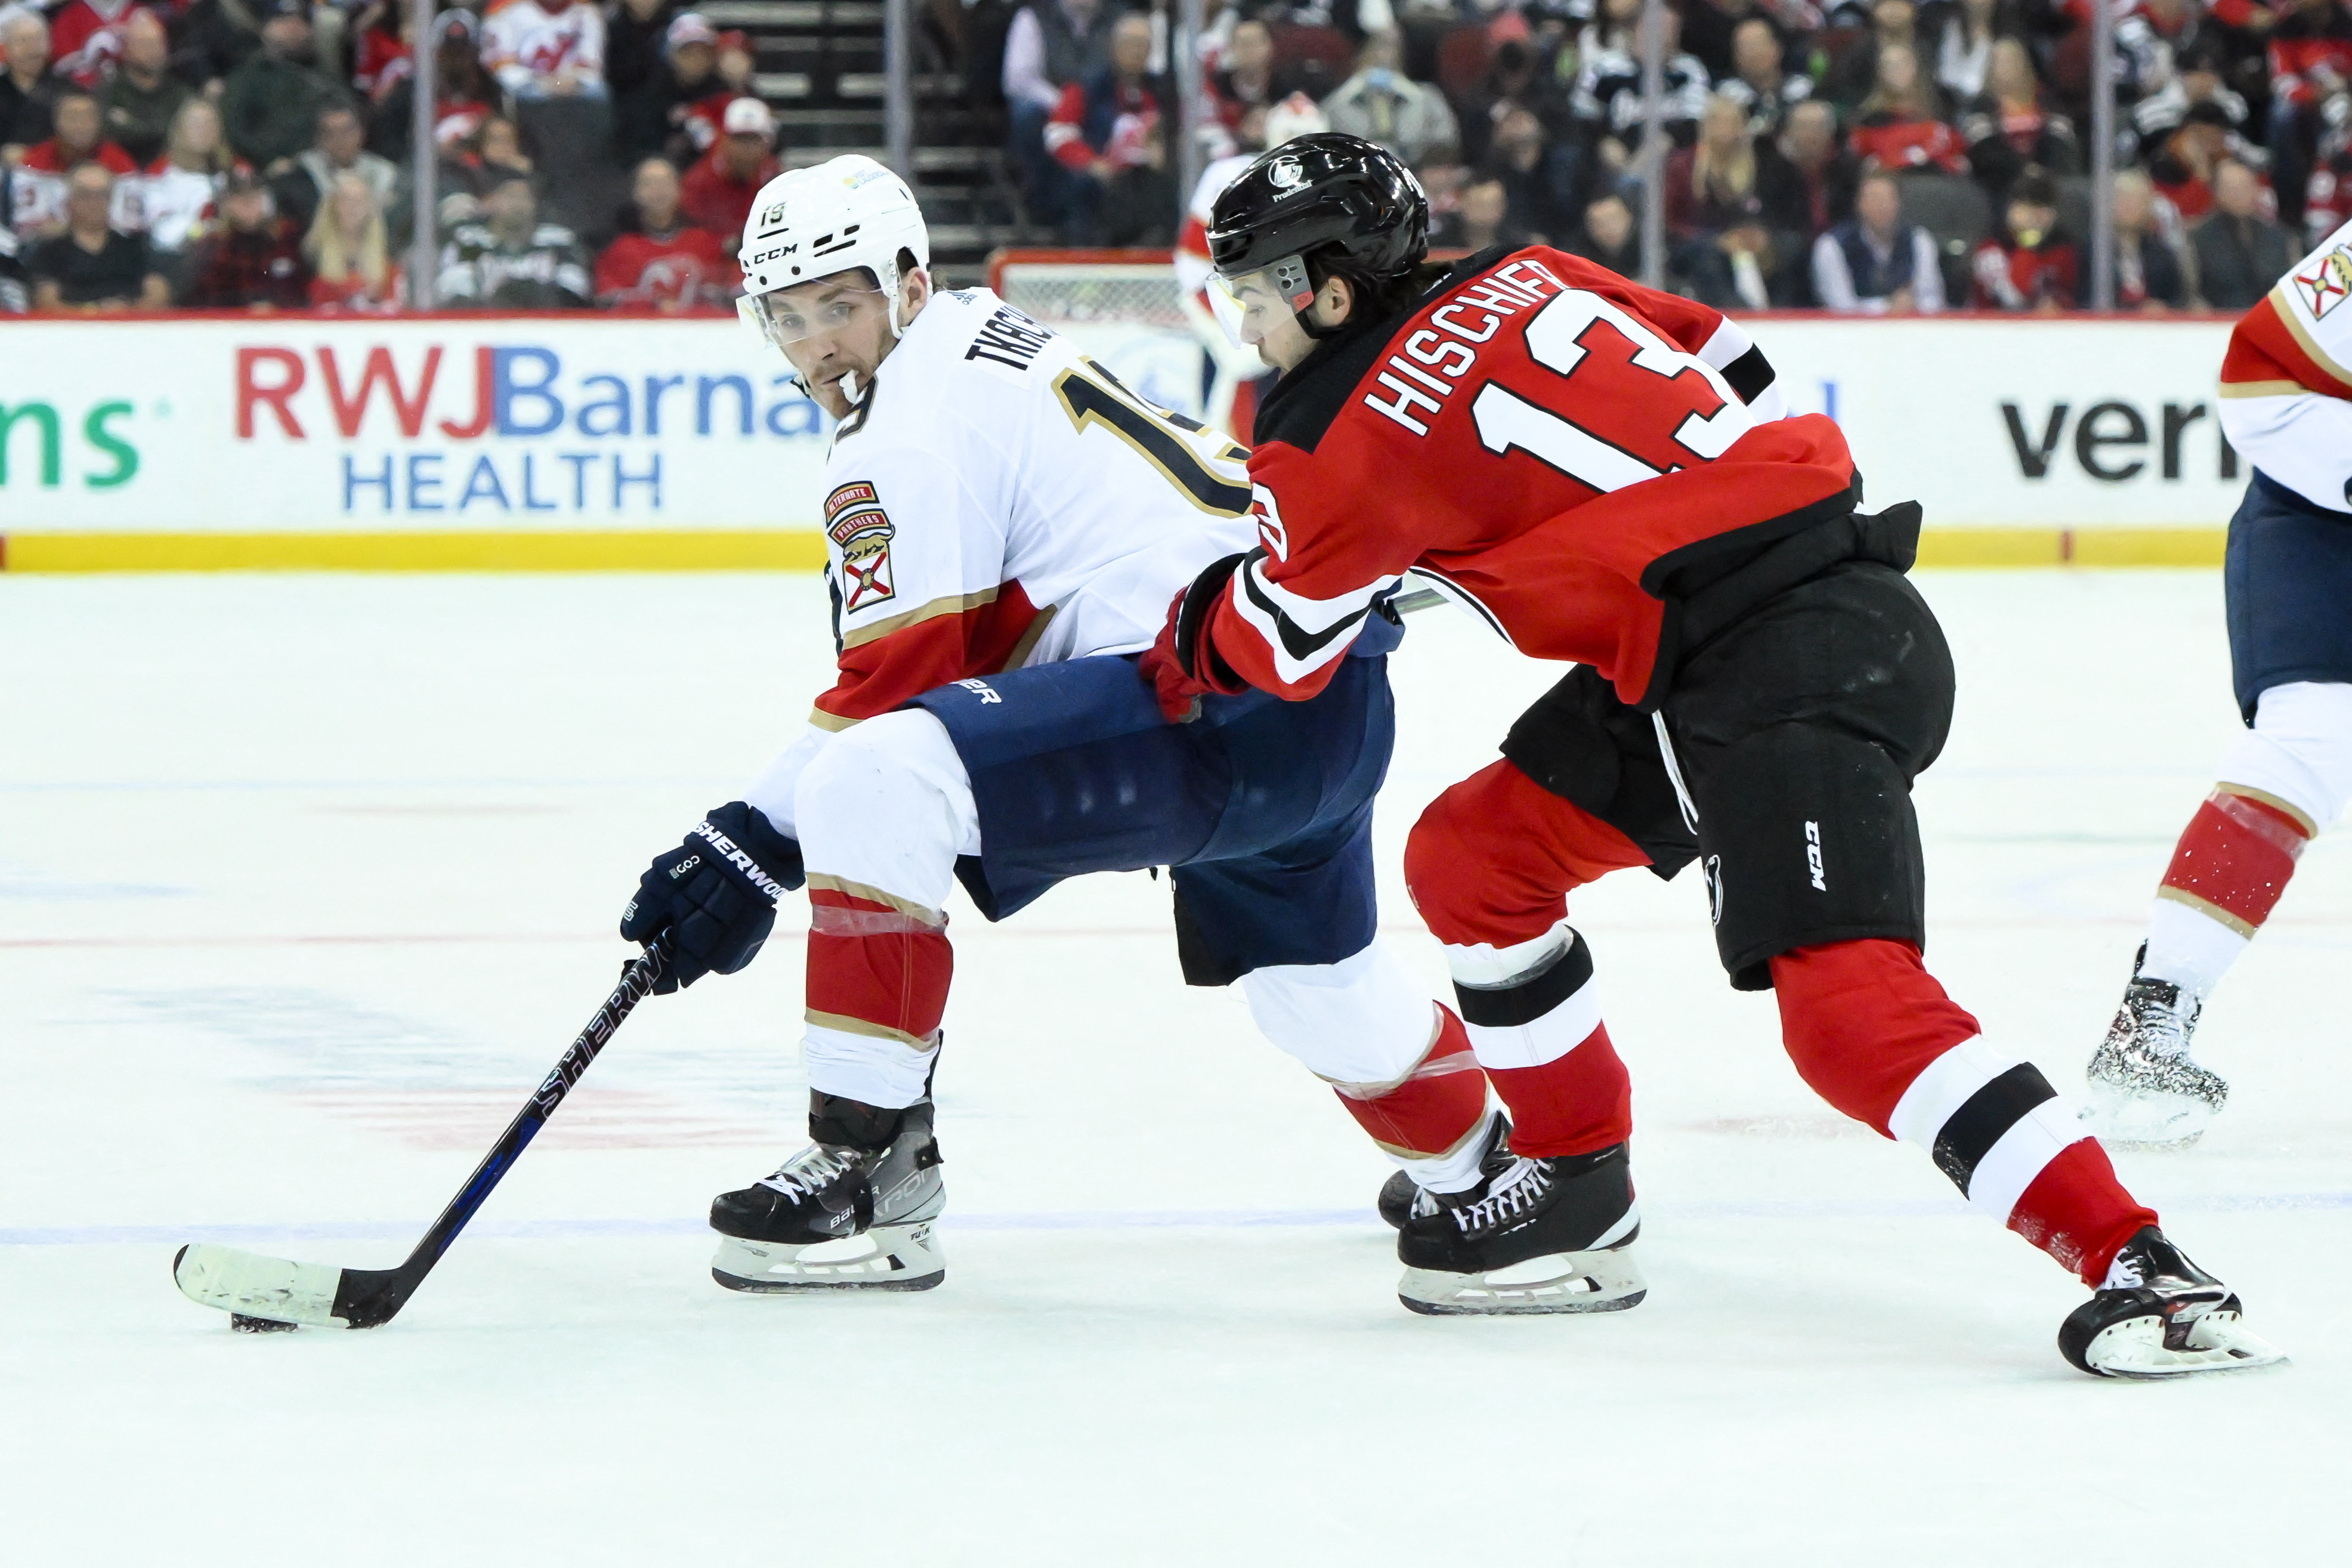 Panthers' Tkachuk thrown out of game vs. Devils after getting